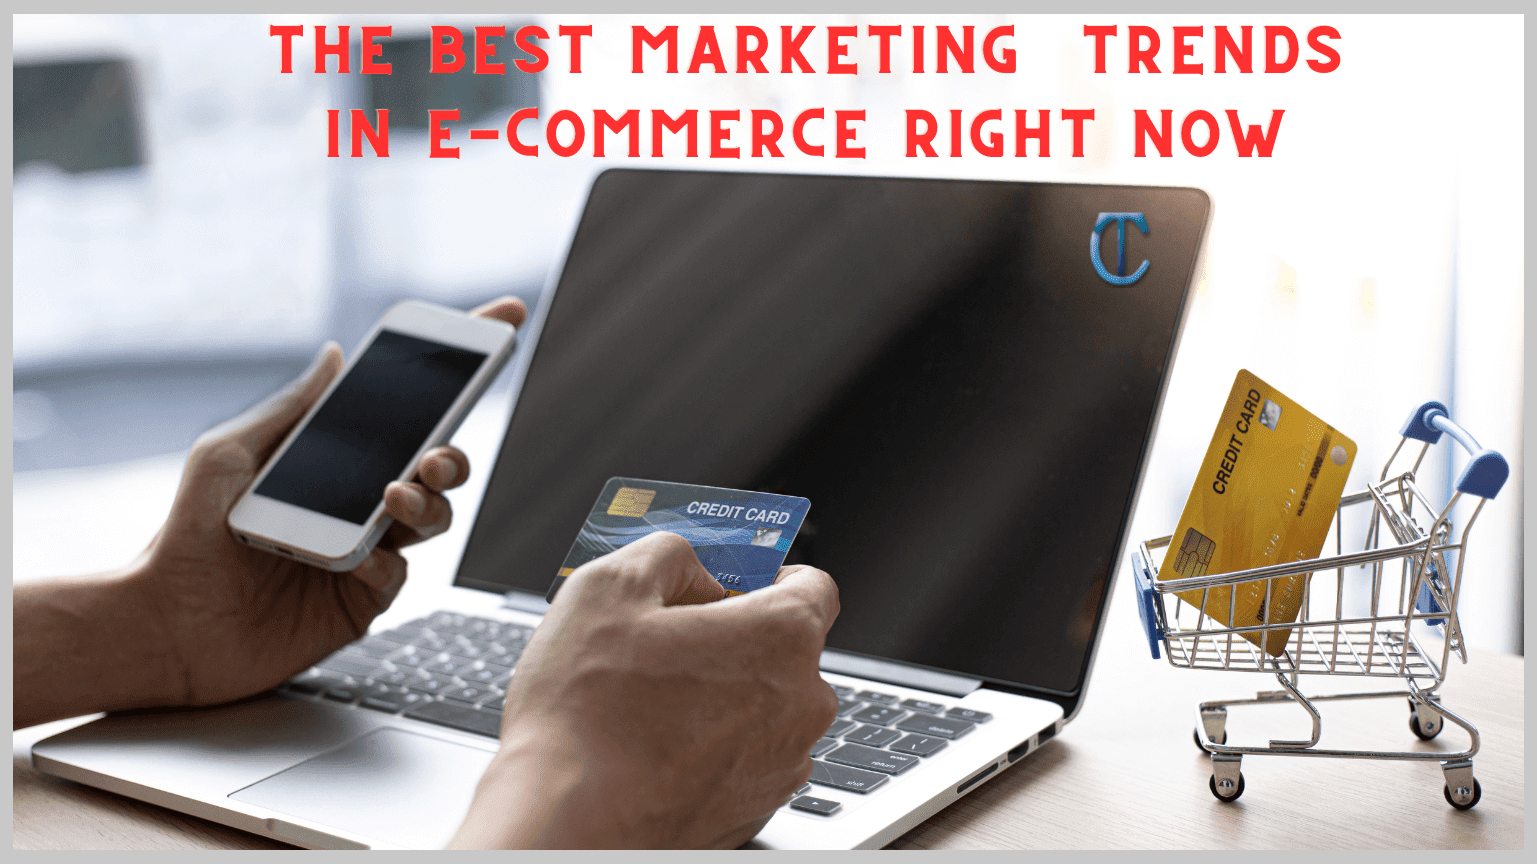 The Best Marketing Trends in E-commerce Right Now